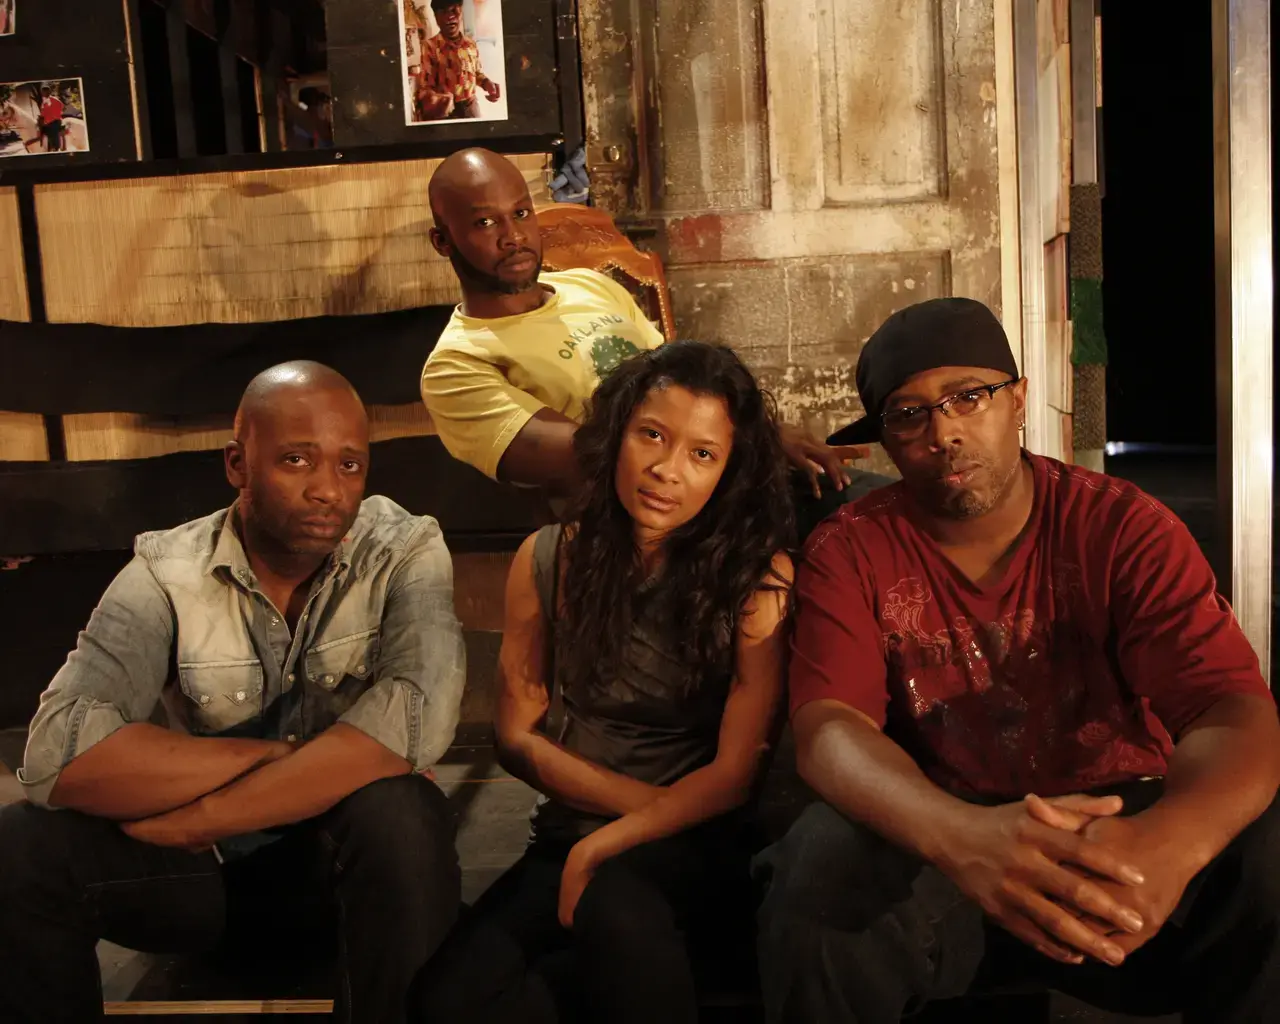 Pictured, from left to right: Theaster Gates, Marc Bamuthi Joseph, Traci Tolmaire, Tommy Shepherd. Photo by Bethanie Hines.